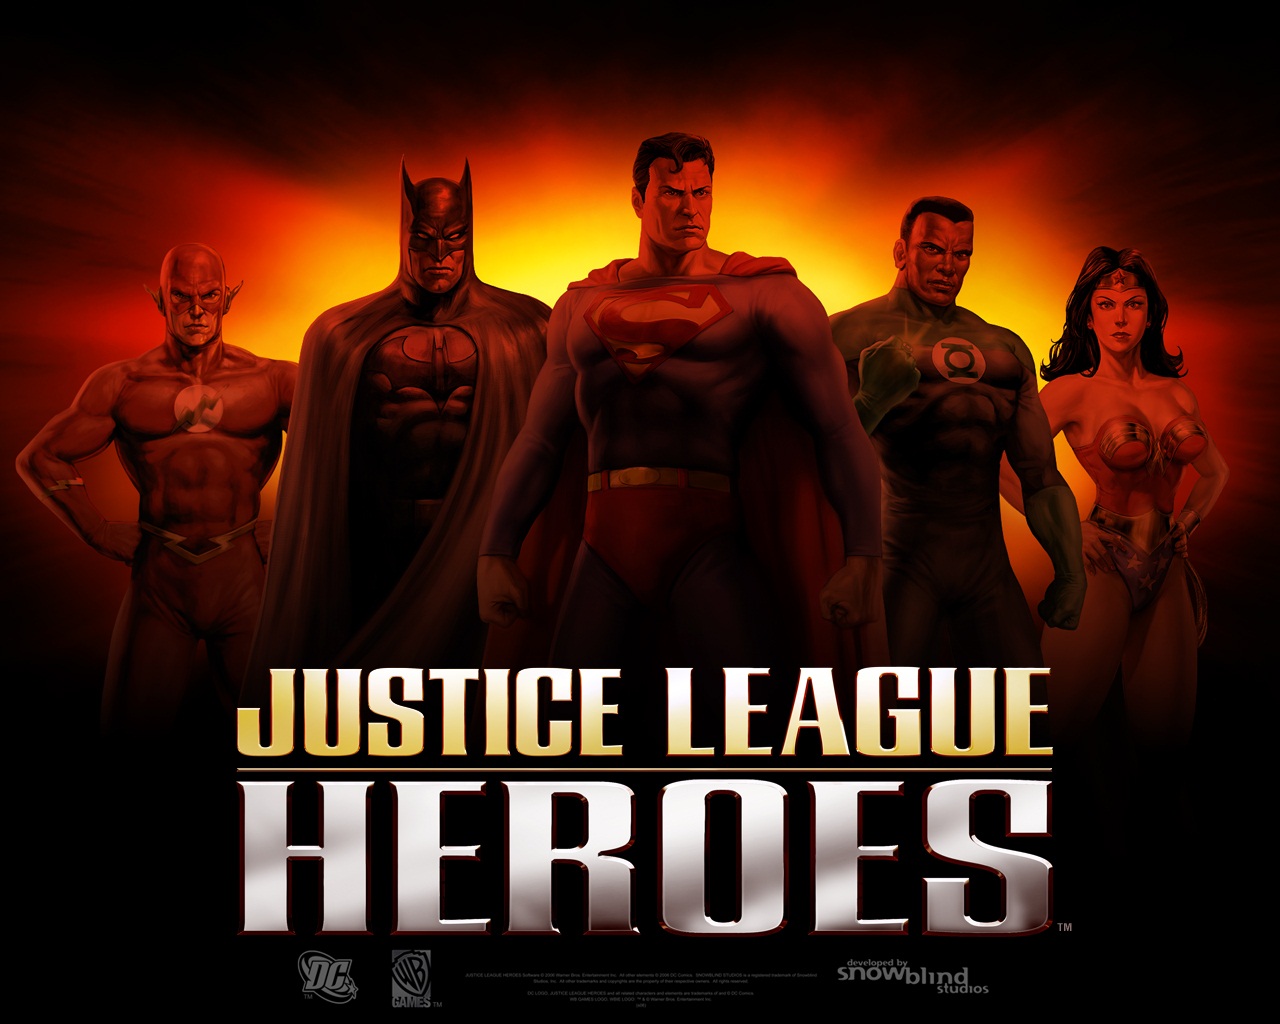 free instals League of Heroes